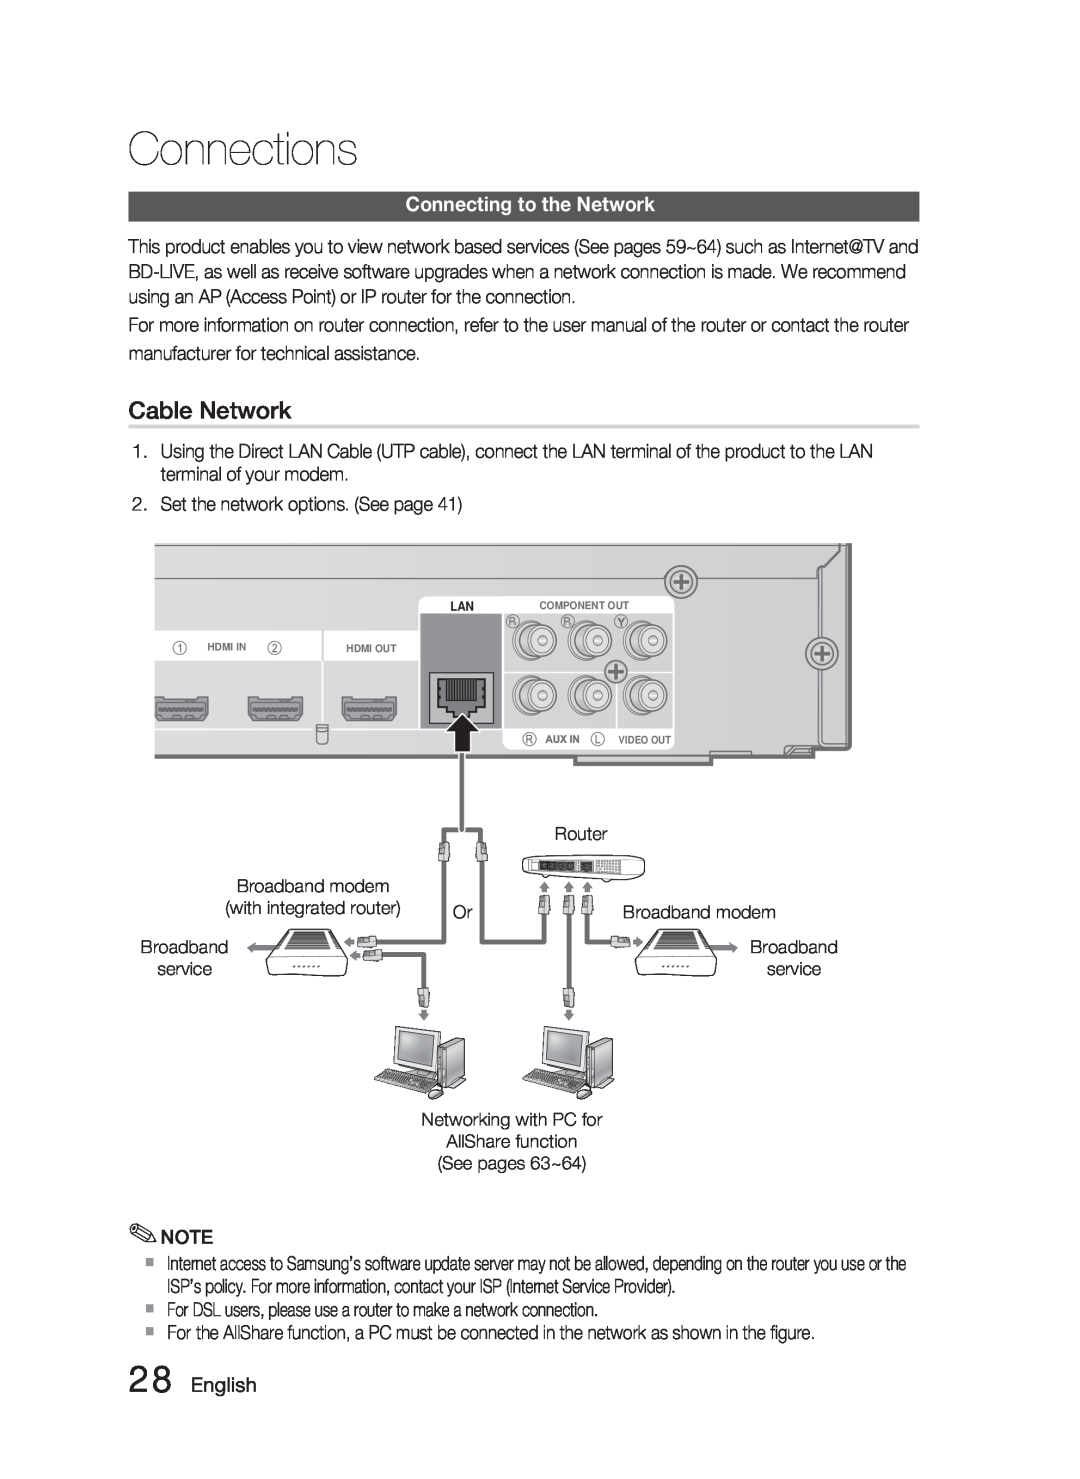 Samsung AH68-02279R user manual Cable Network, Connecting to the Network, English, Connections 